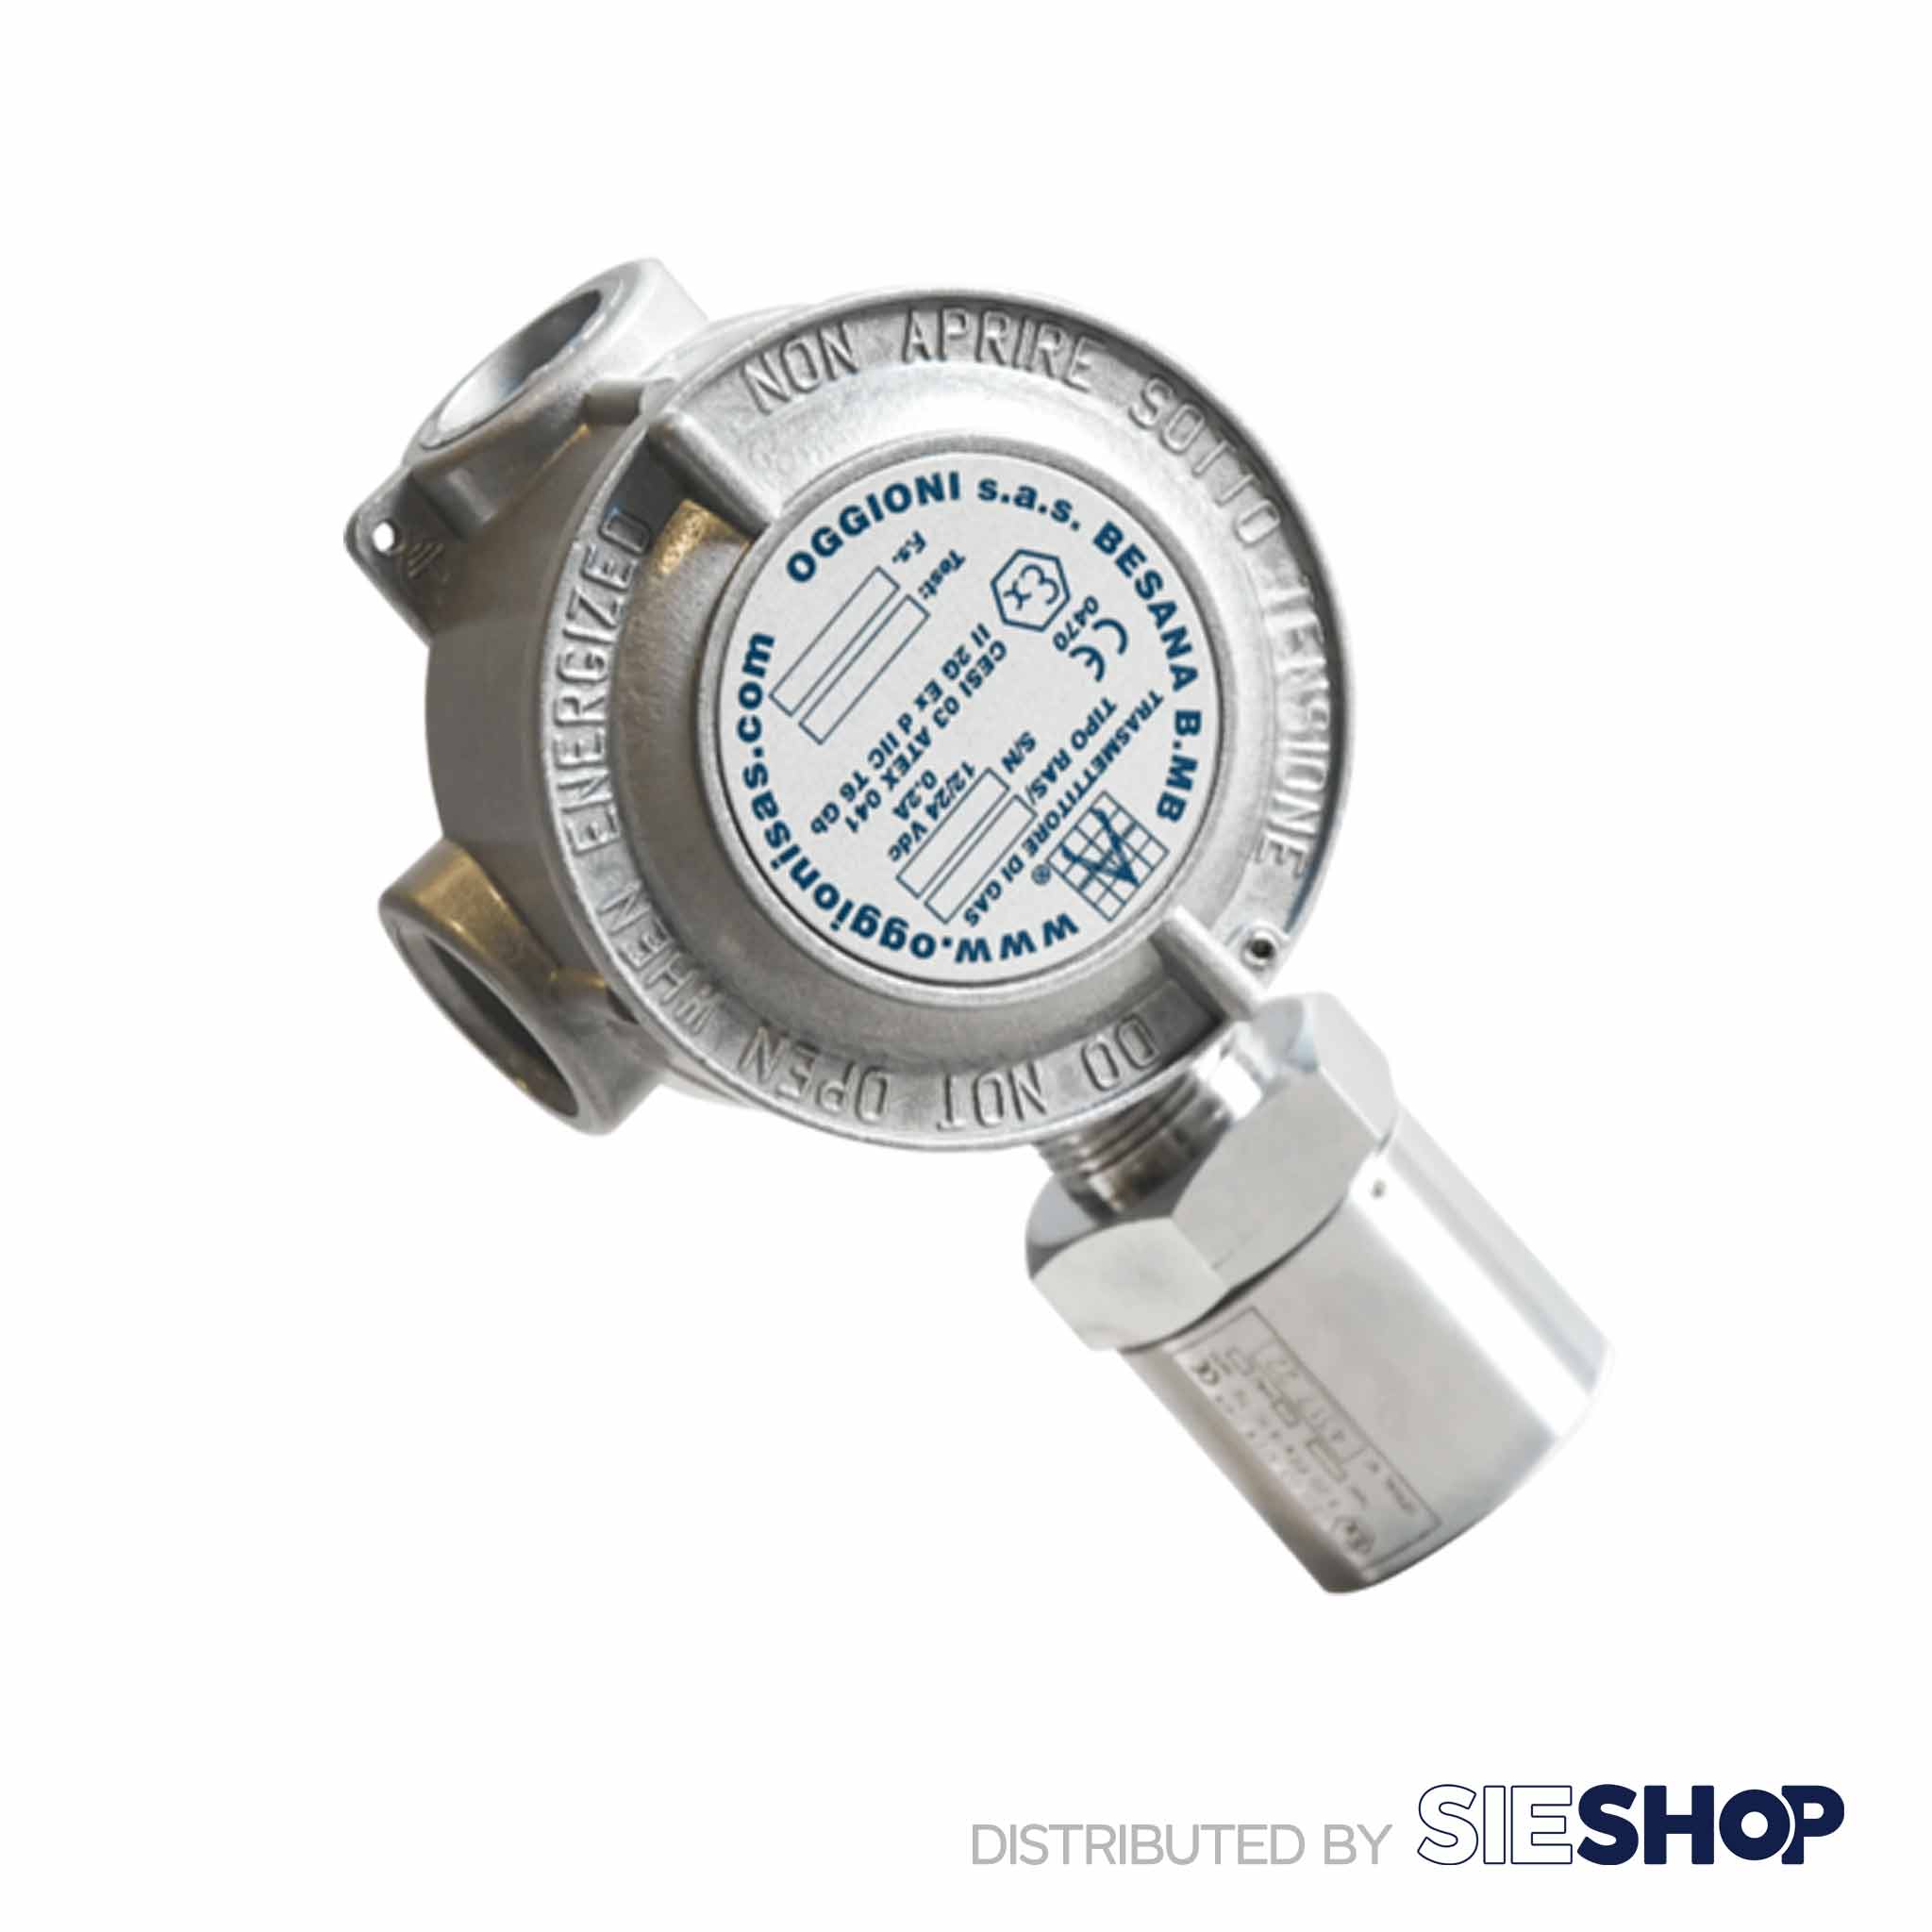 Oggioni RAS/AD Gas Detector SIESHOP Electrochemical with O2 for - Cell